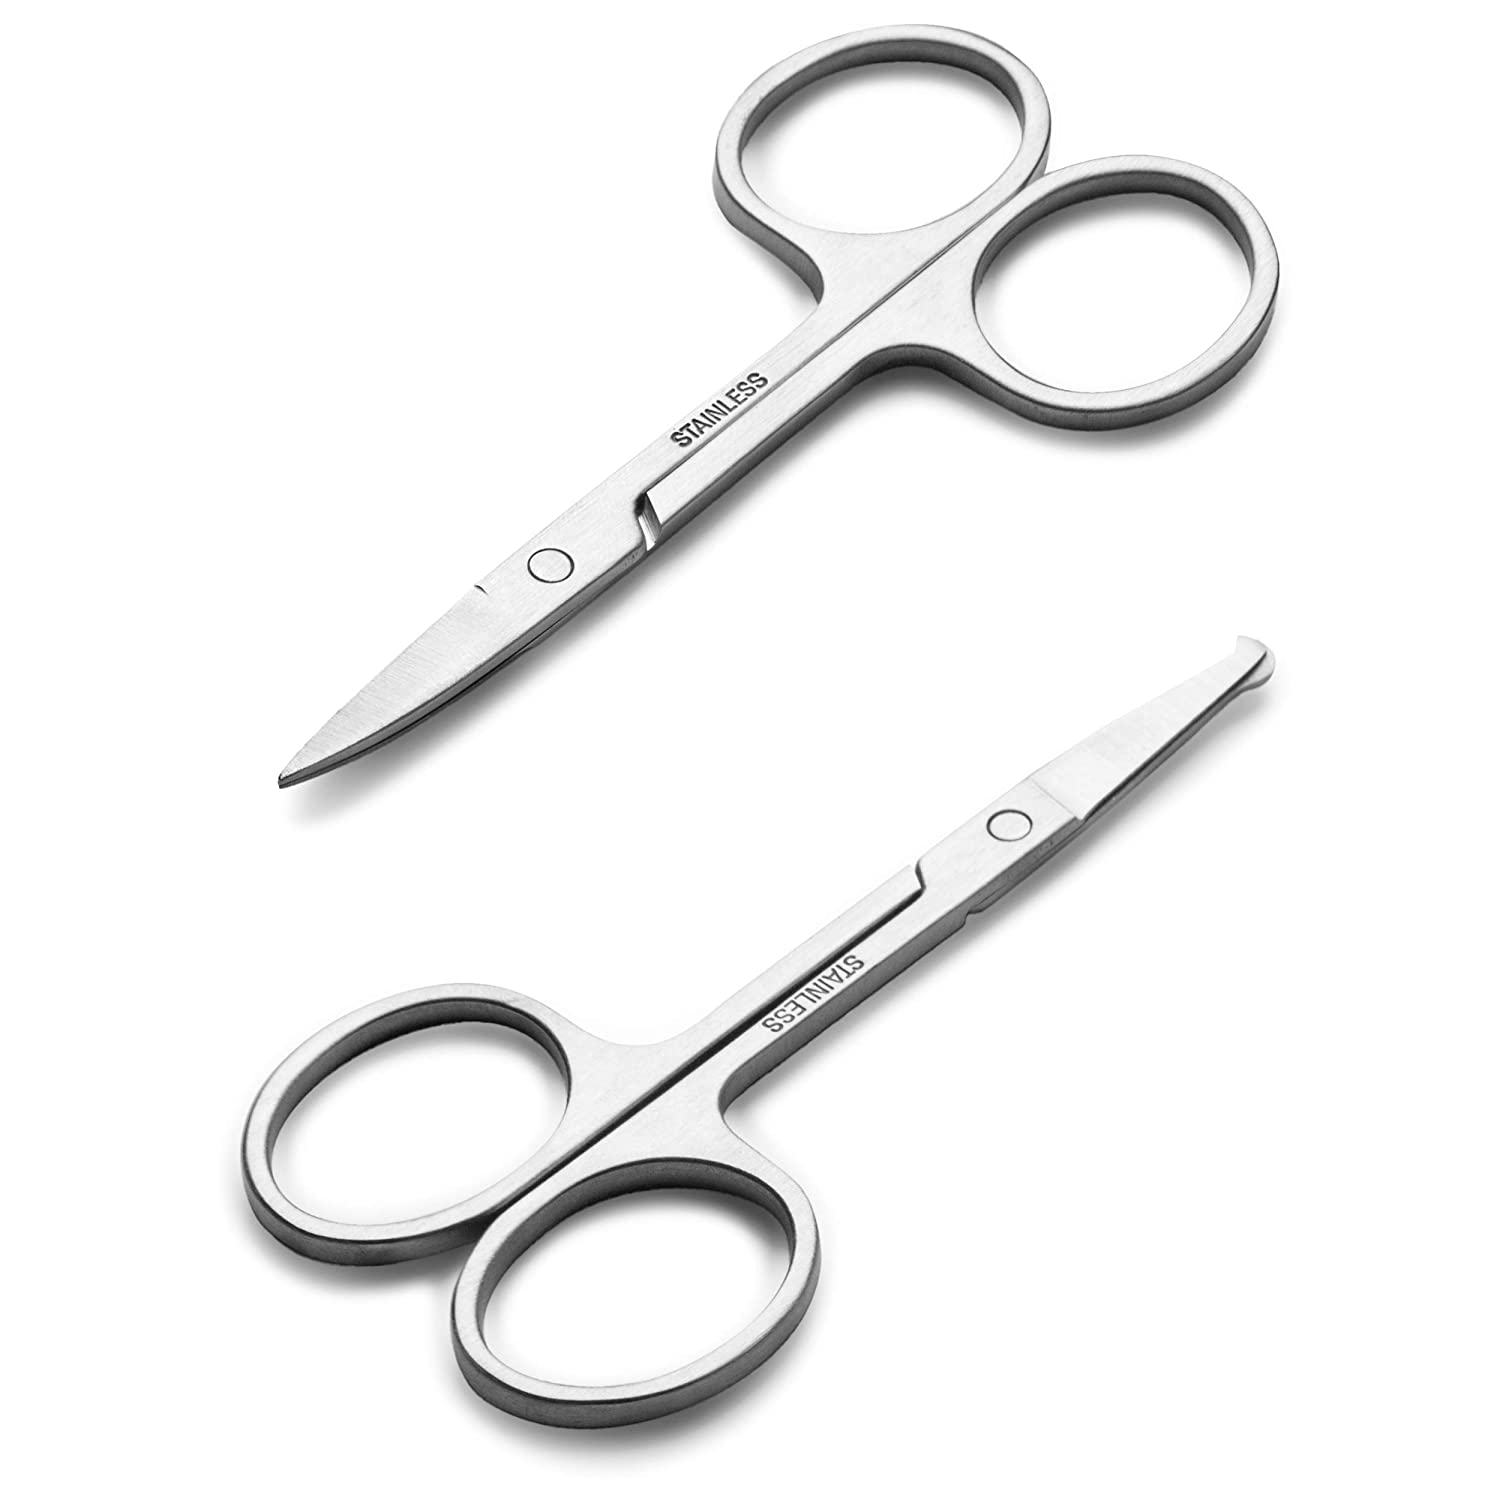 2 Pack Curved Craft Scissors Small Scissors Beauty Eyebrow Scissors  Stainless Steel Trimming Scissors for Eyebrow Eyelash Extensions, Facial  Nose Hair 